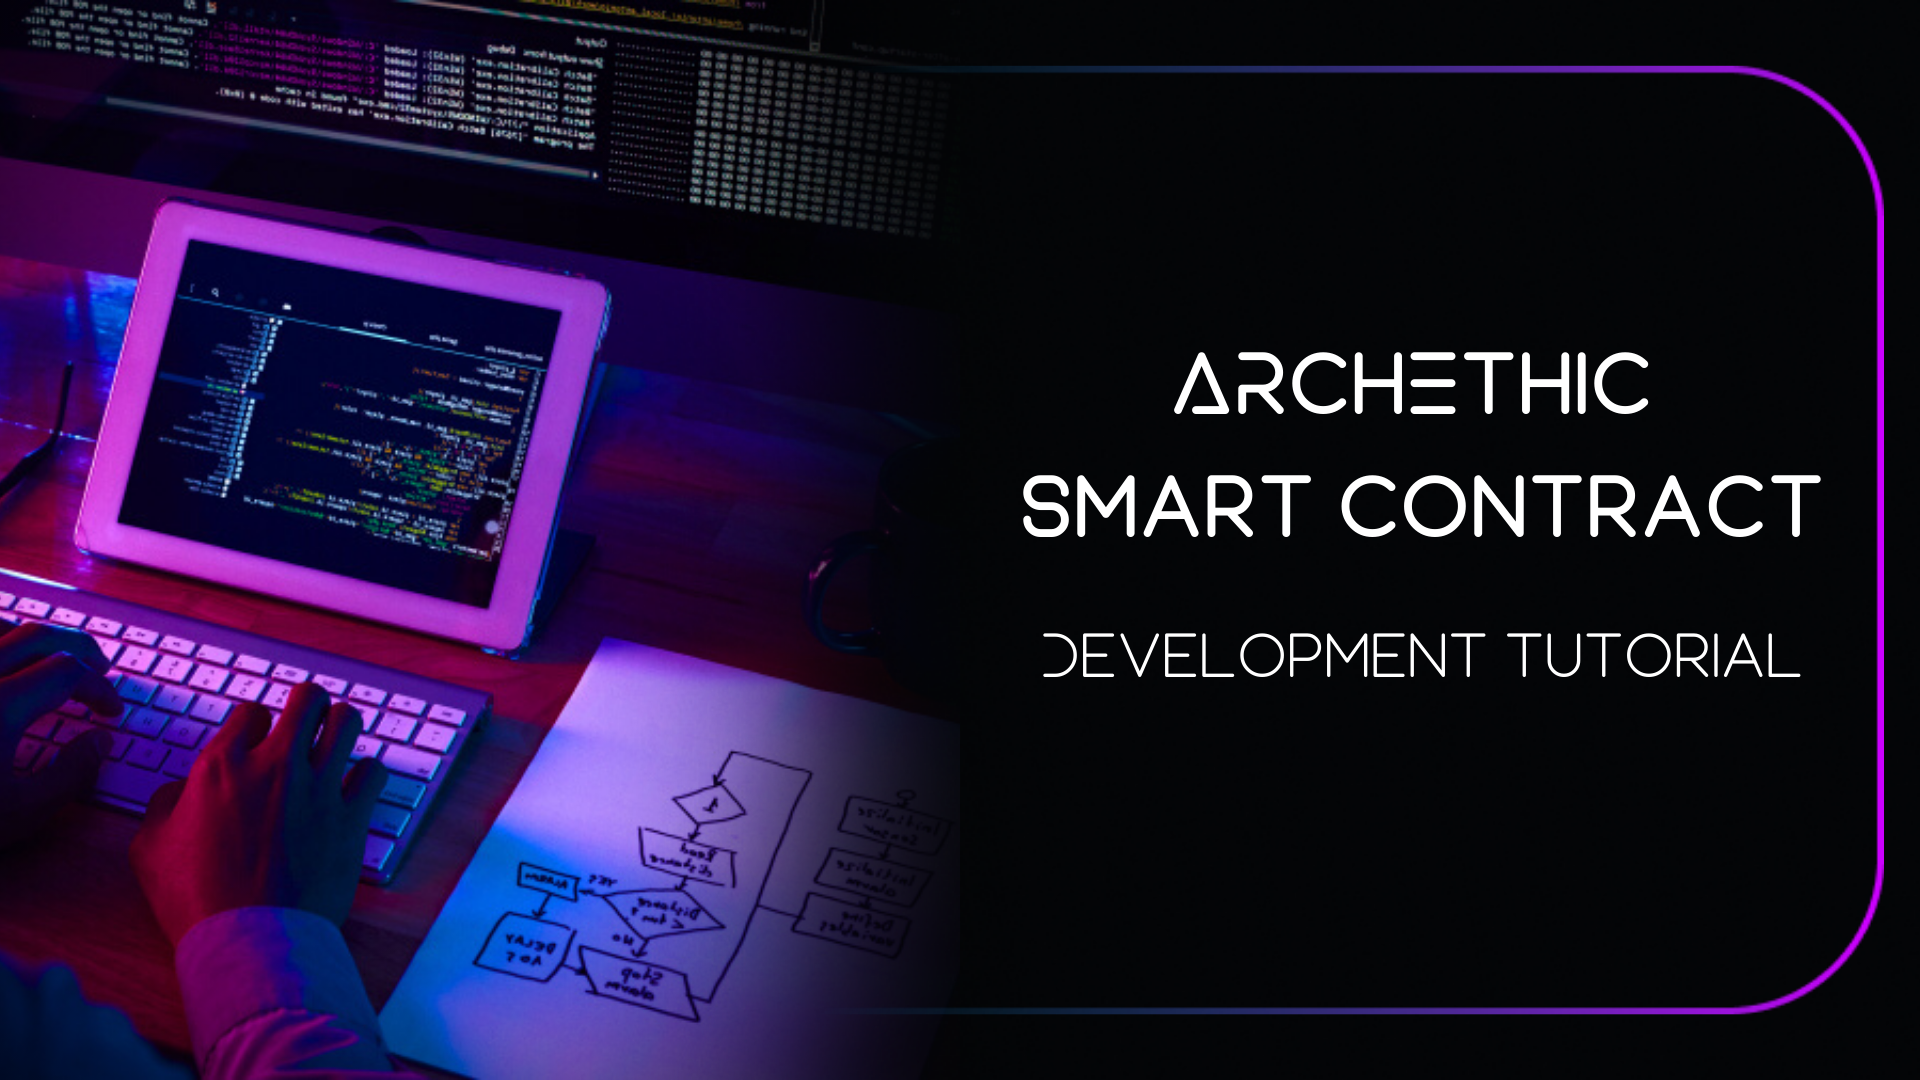 How to Build & Deploy Smart Contracts on Archethic?